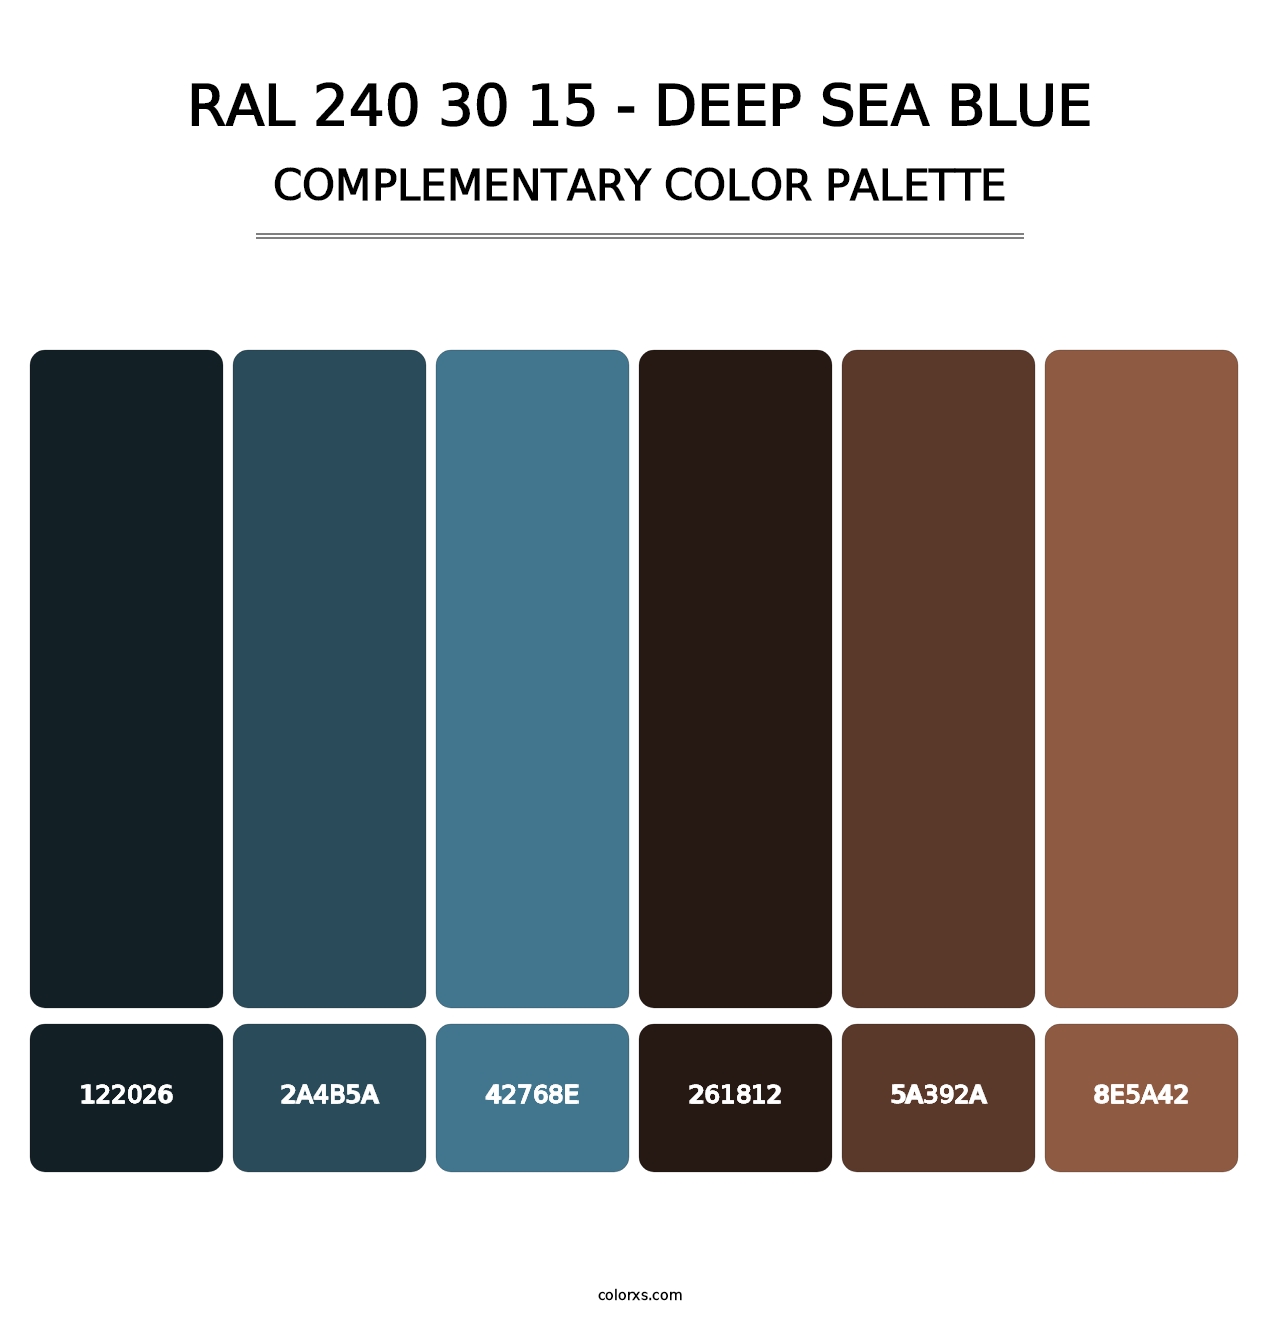 RAL 240 30 15 - Deep Sea Blue - Complementary Color Palette